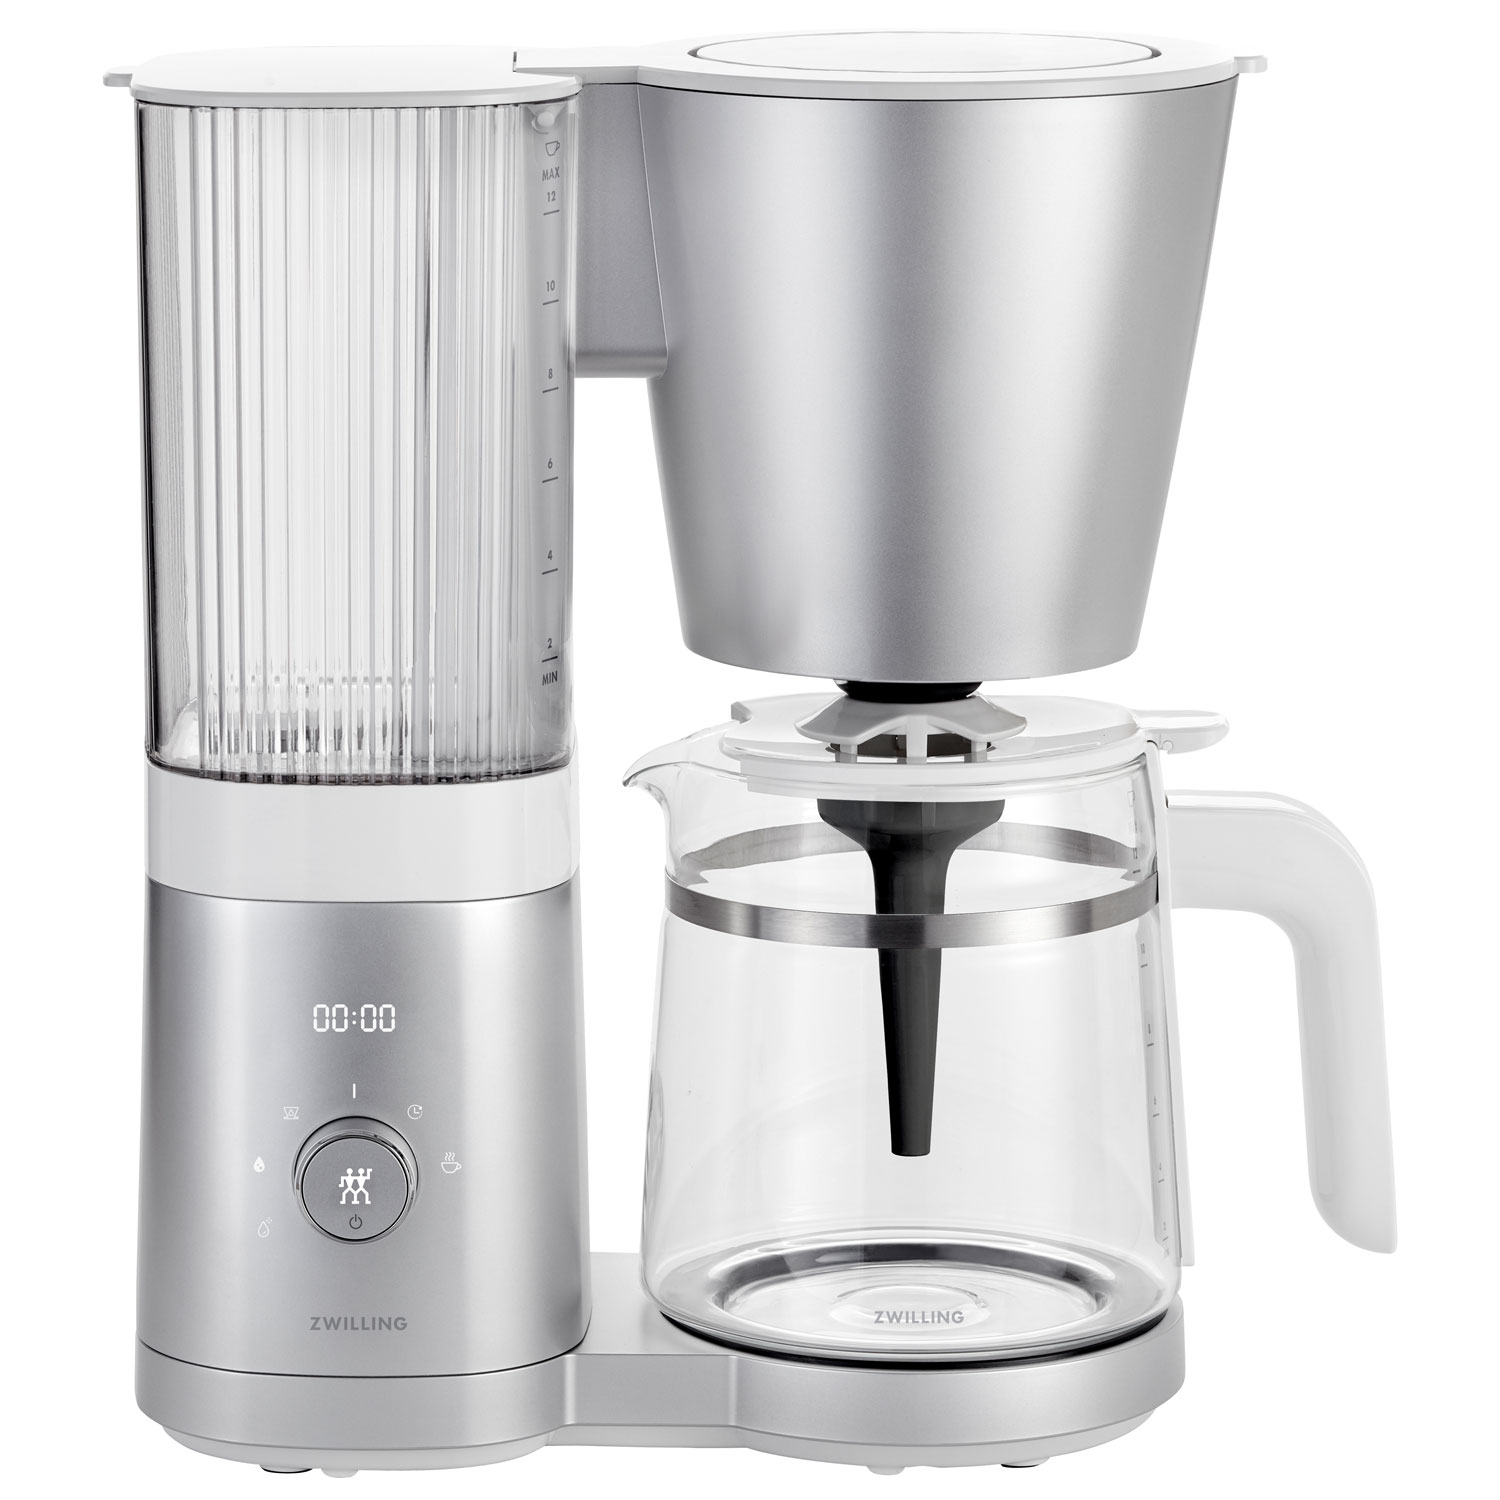 Zwilling Drip Coffee Maker - 12-Cup - Silver